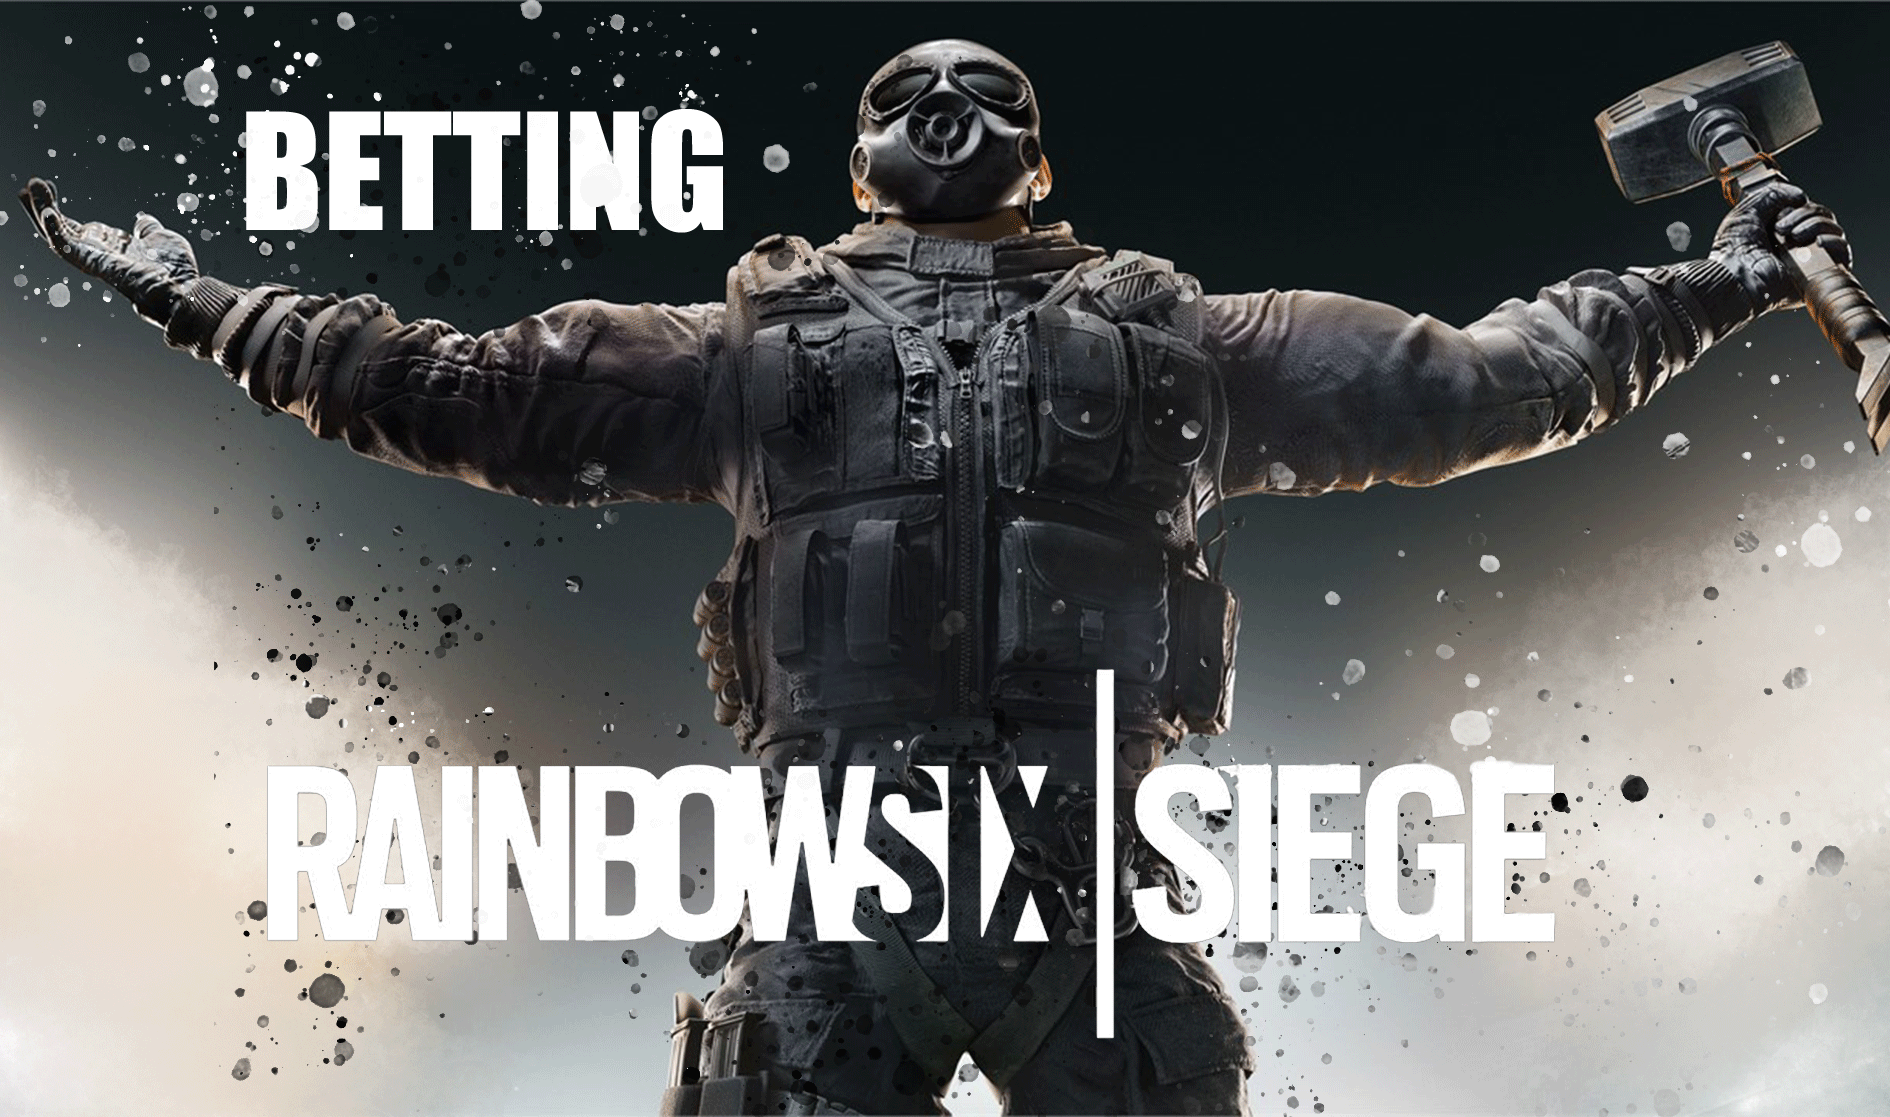 These six Rainbow Sieges (RS6) began with the first season of the ESL Pro League